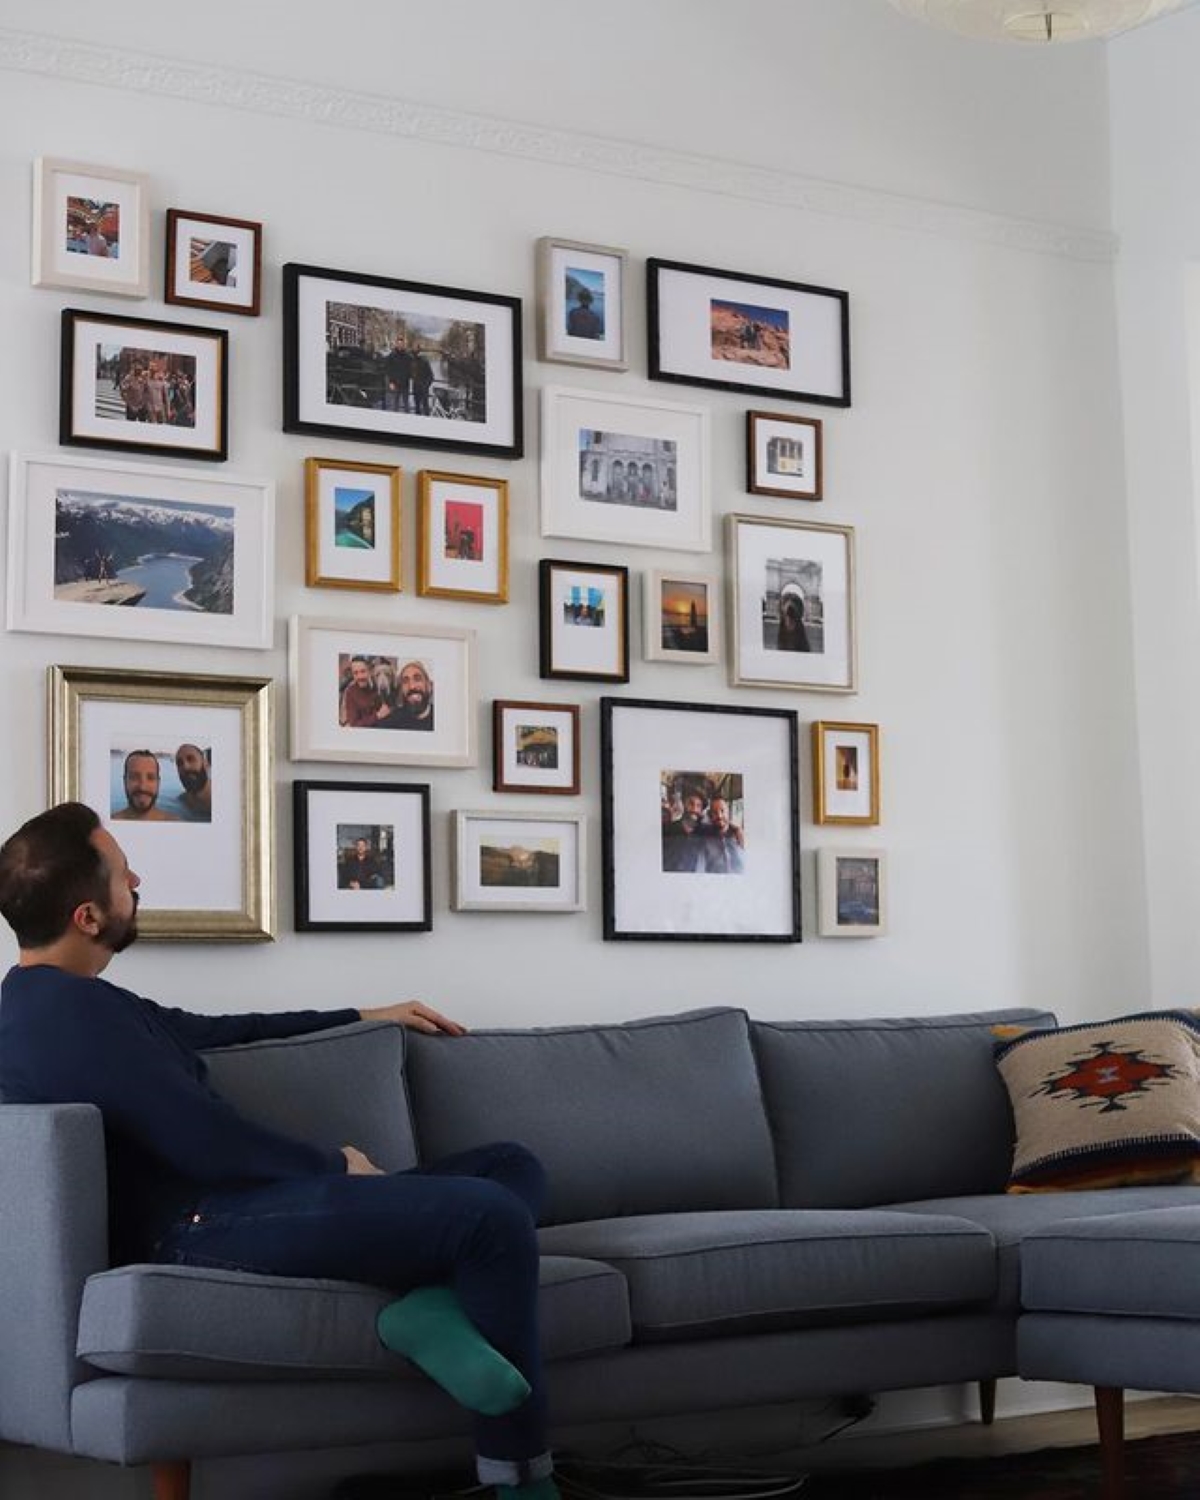 Man sitting on couch looking at photo gallery wall.